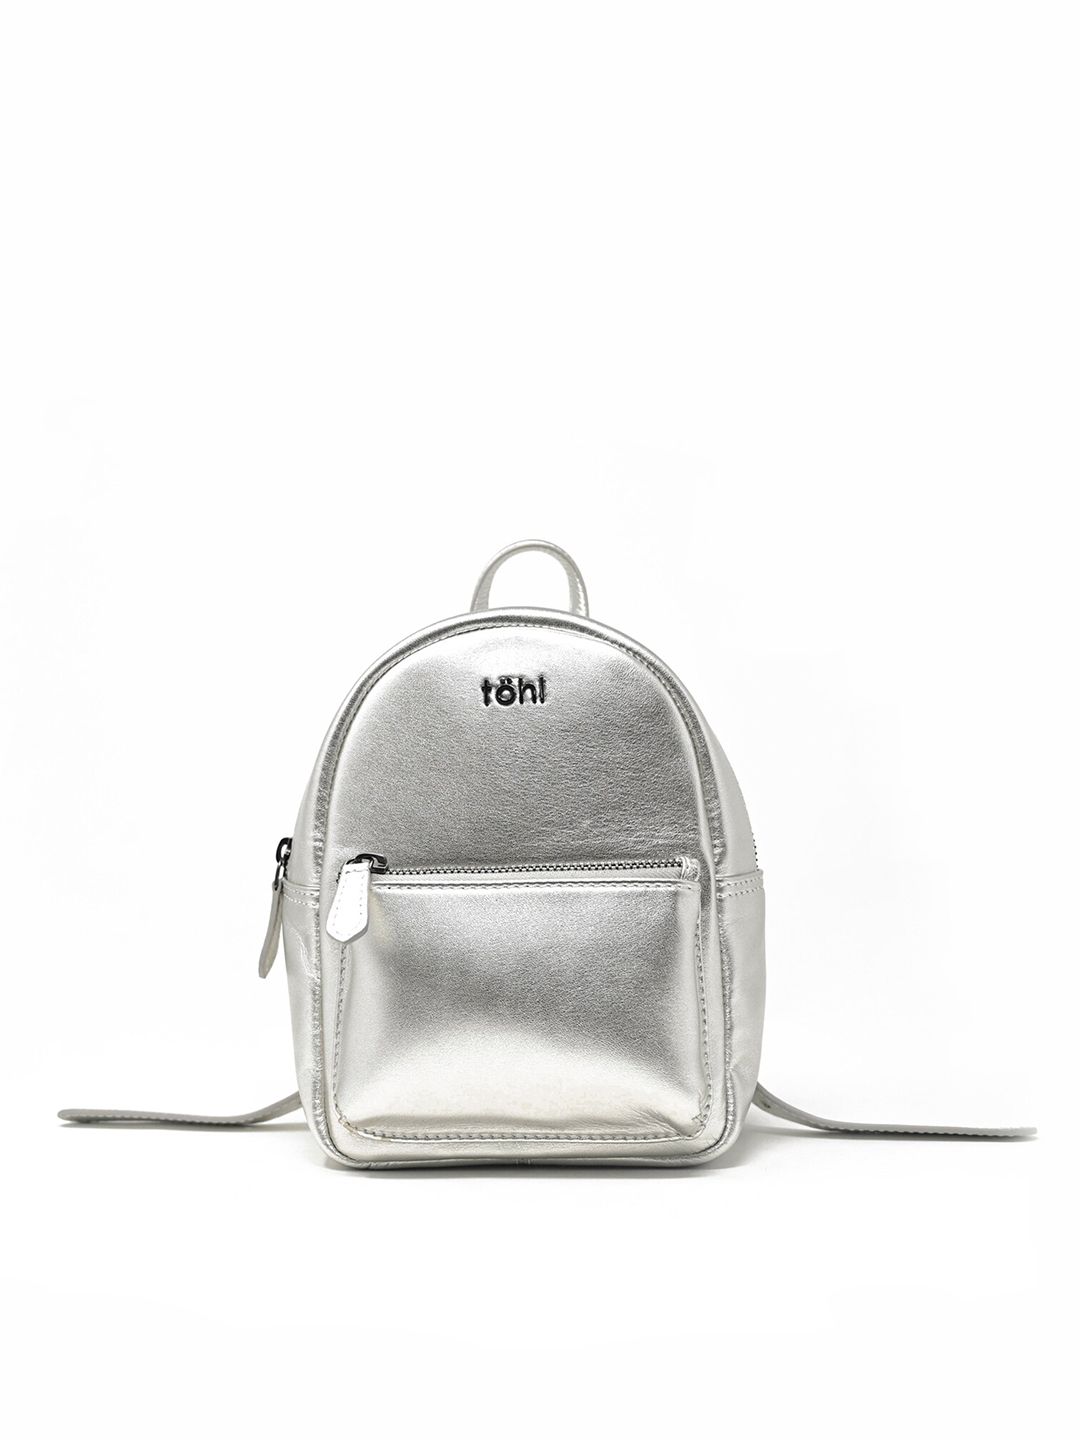 tohl Women Silver Backpack Price in India